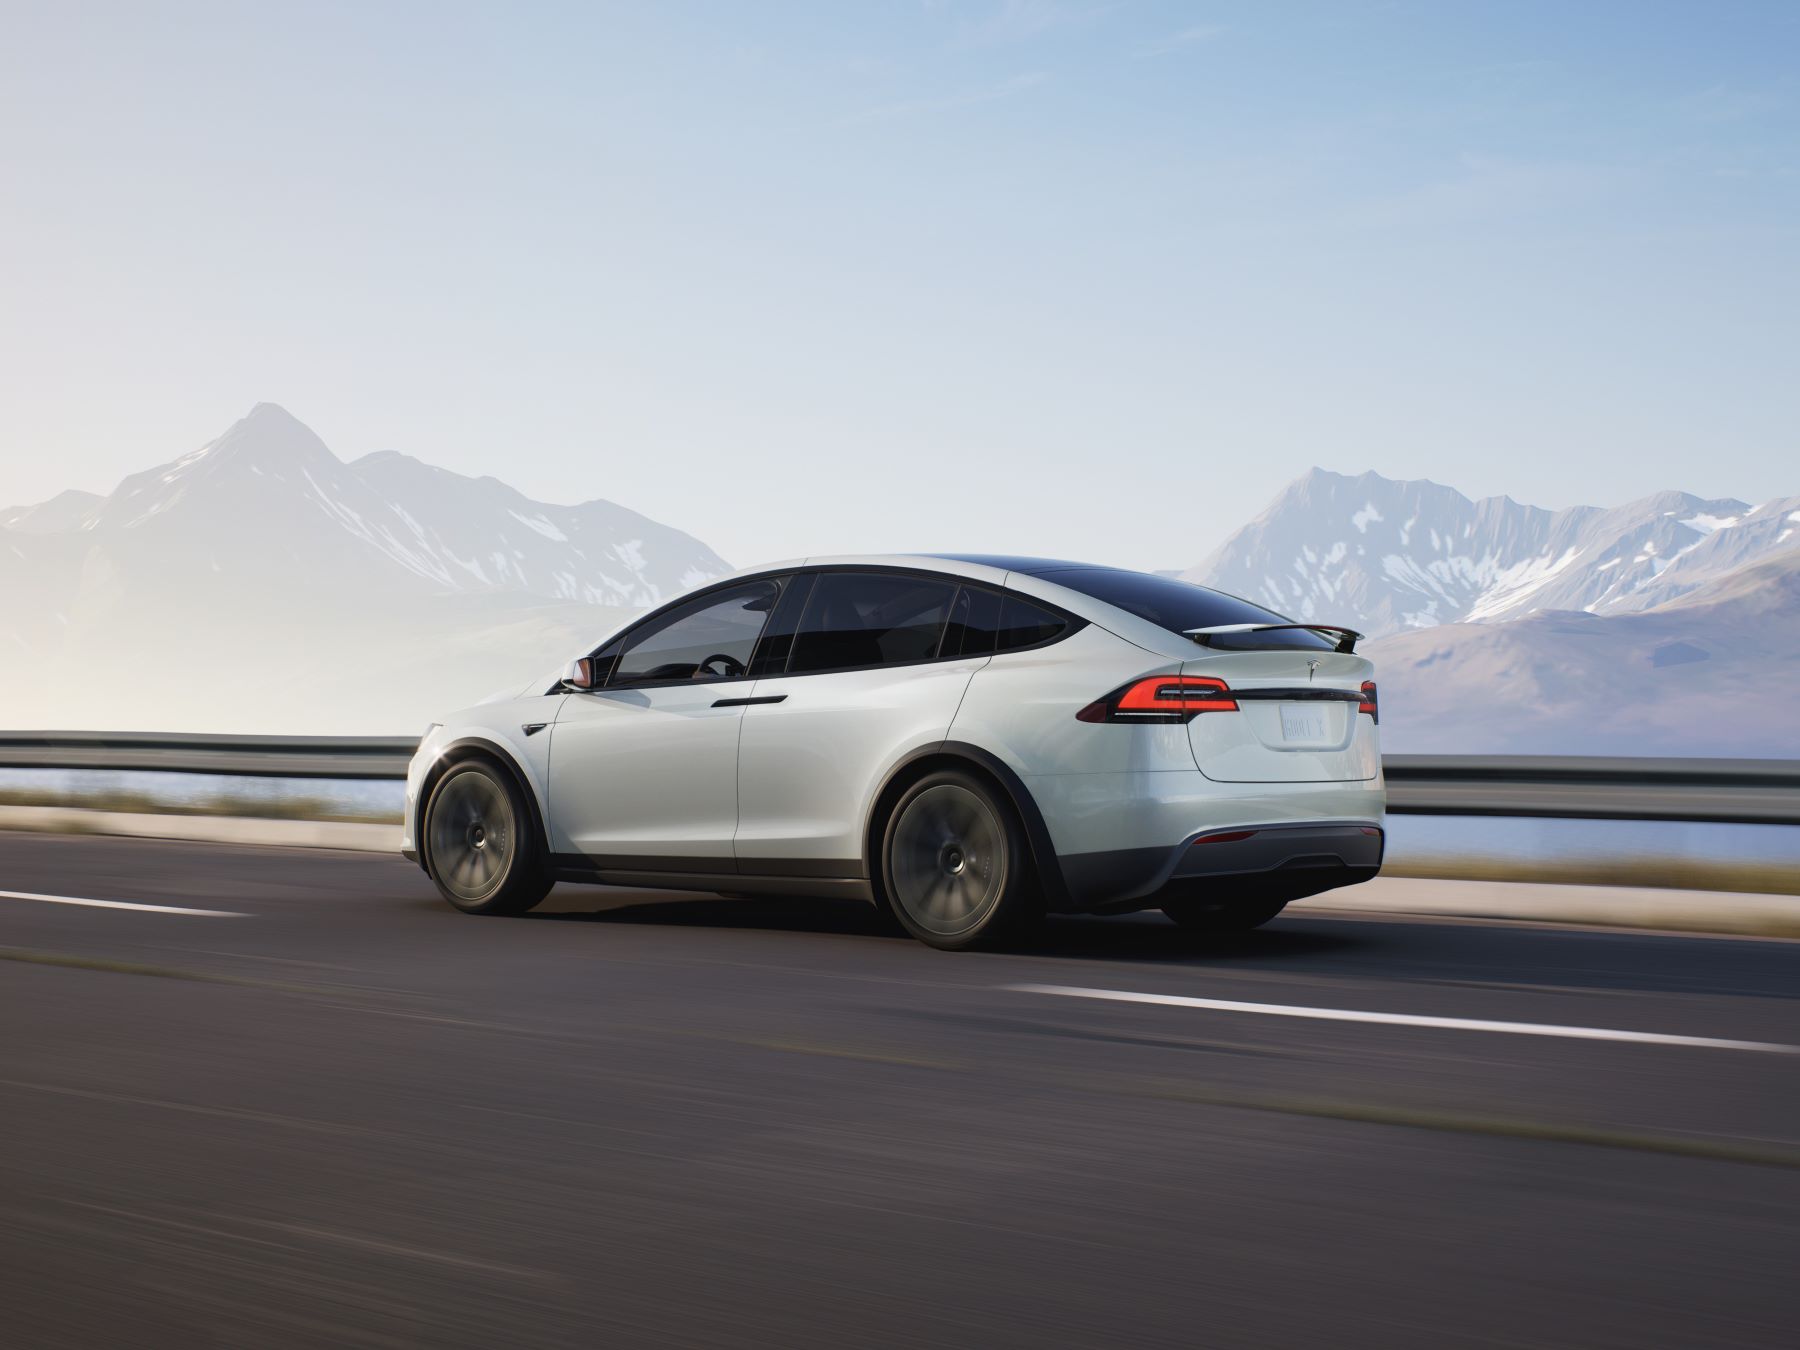 2022 Tesla Model X all-electric compact SUV in white side shot driving on a highway near a snowy mountain range